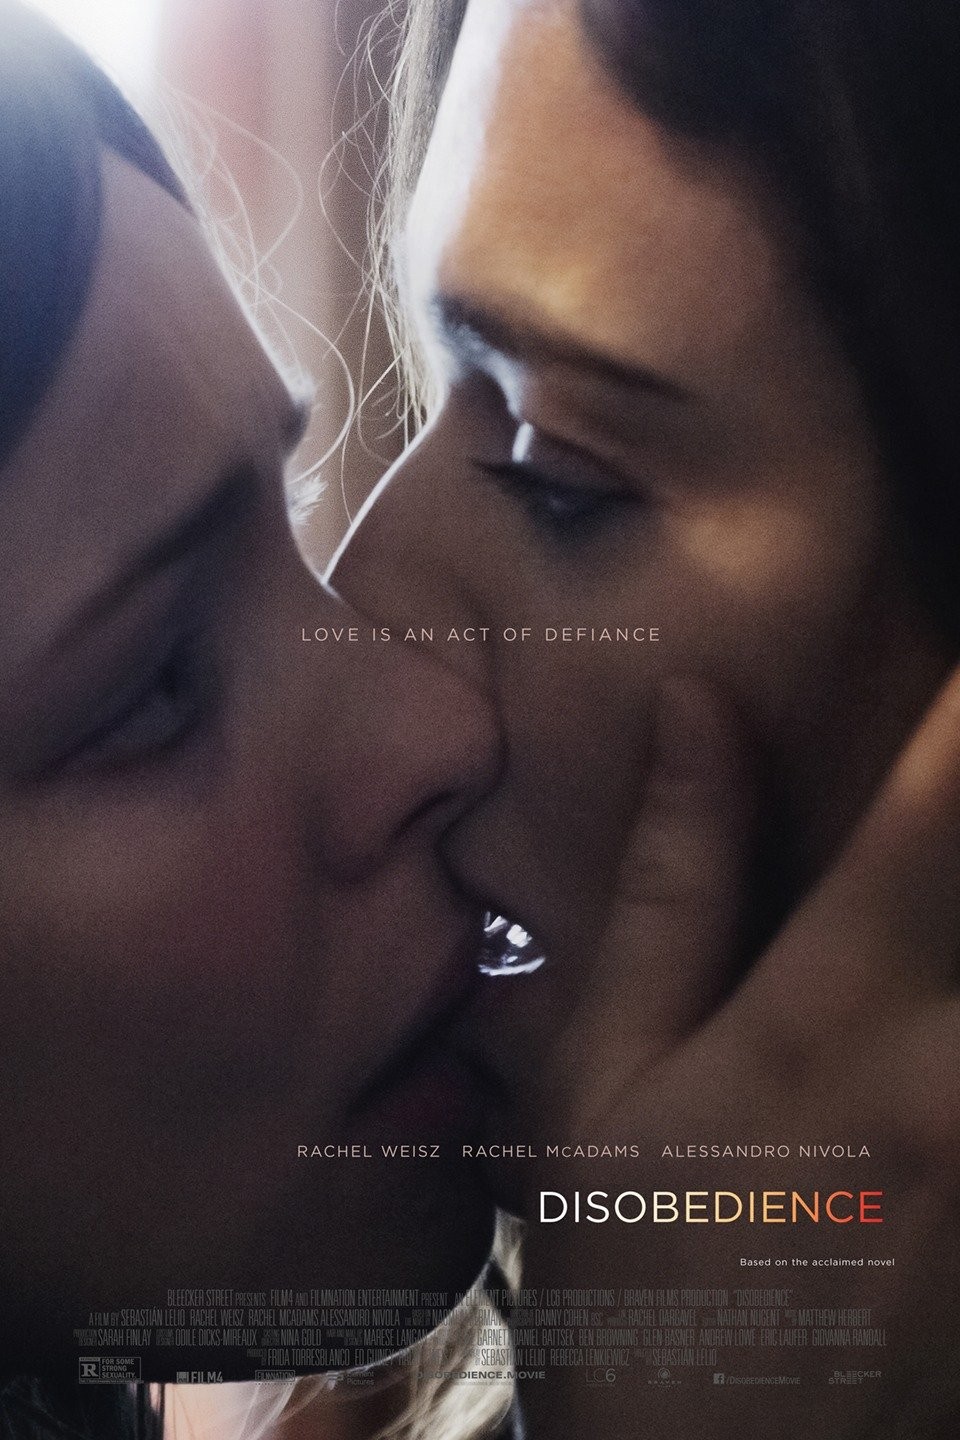 Disobedience Review - A Passionate Same-Sex Love Story